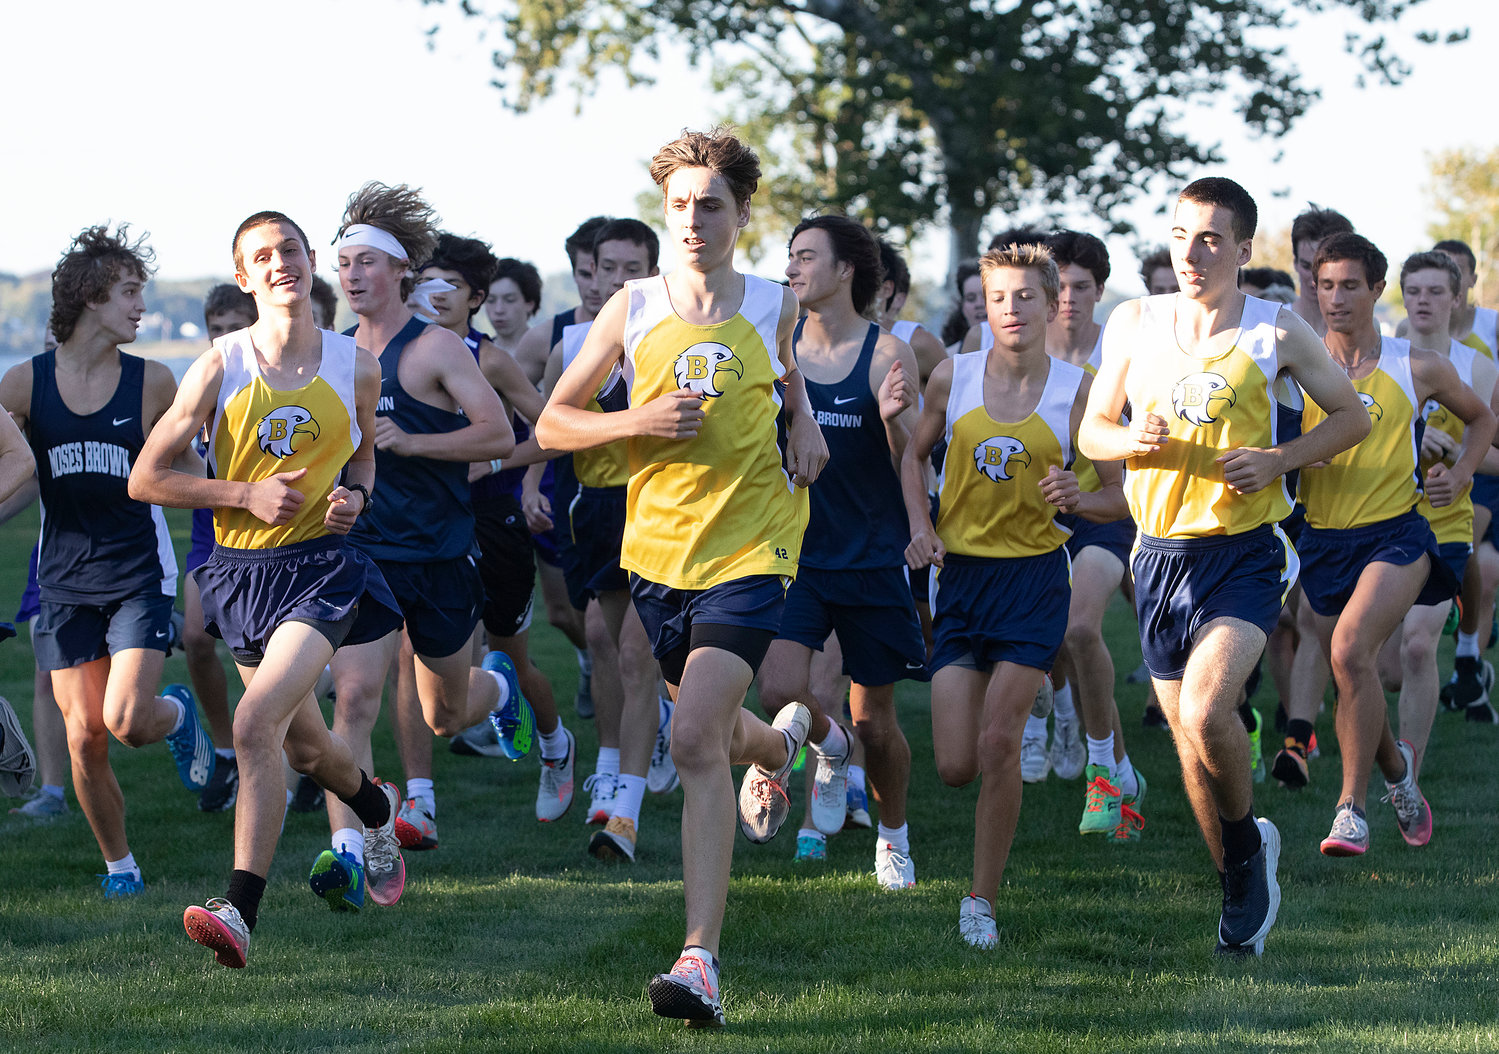 Elliot Lefort, Myles Napolitano, Finn Myatt, and Connor Curran (from left to right) at the start of the race.